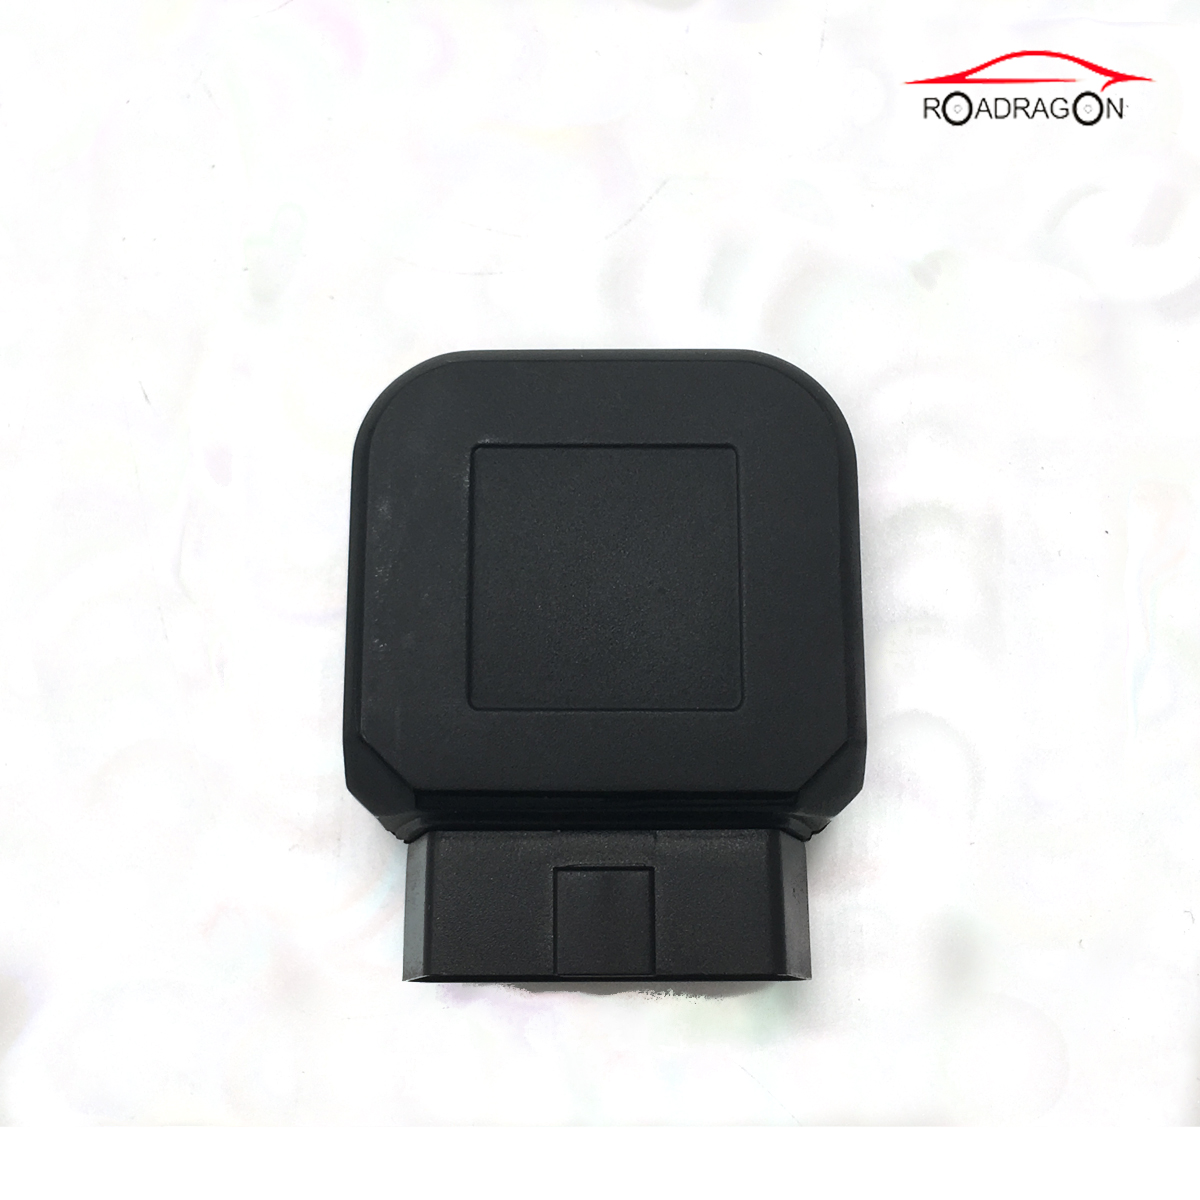 Competitive Price for Vehicle Locator Device -
 M220 is an intelligent 2GOBD solution with WIFI hotspot for connected car, which integrates 2G modem and GPS. Developed on Qualcomm Snapdragon chipse...